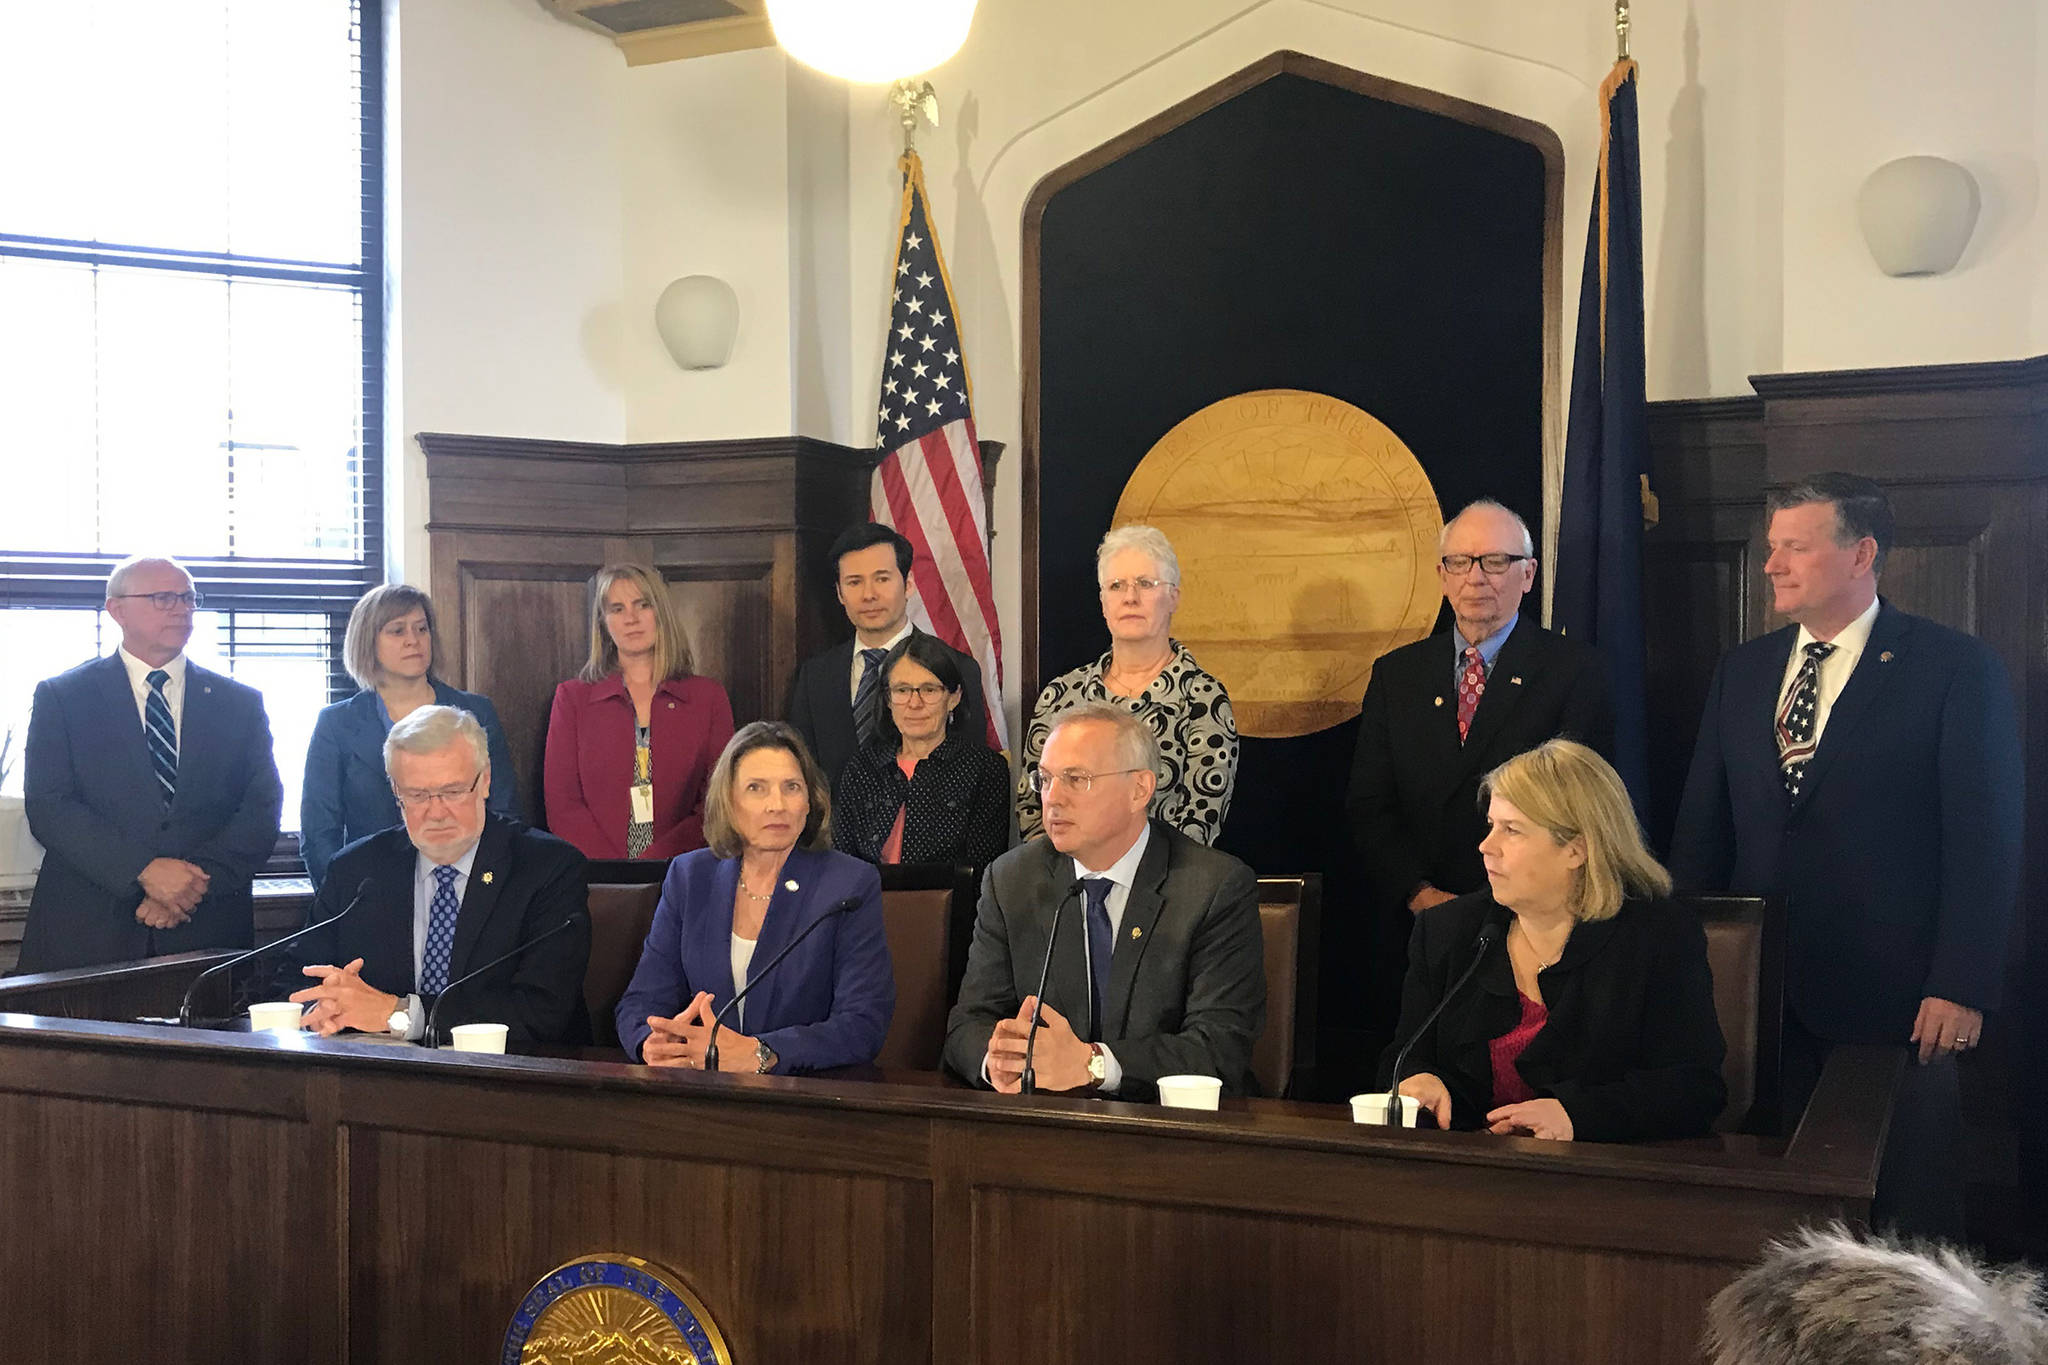 Members of the Alaska Legislature’s Legislative Council prepare to speak to media members about preparing for a lawsuit against the governor’s administration over the future of education funding at the Alaska State Capitol on Tuesday, May 28, 2019. (Alex McCarthy | Juneau Empire)